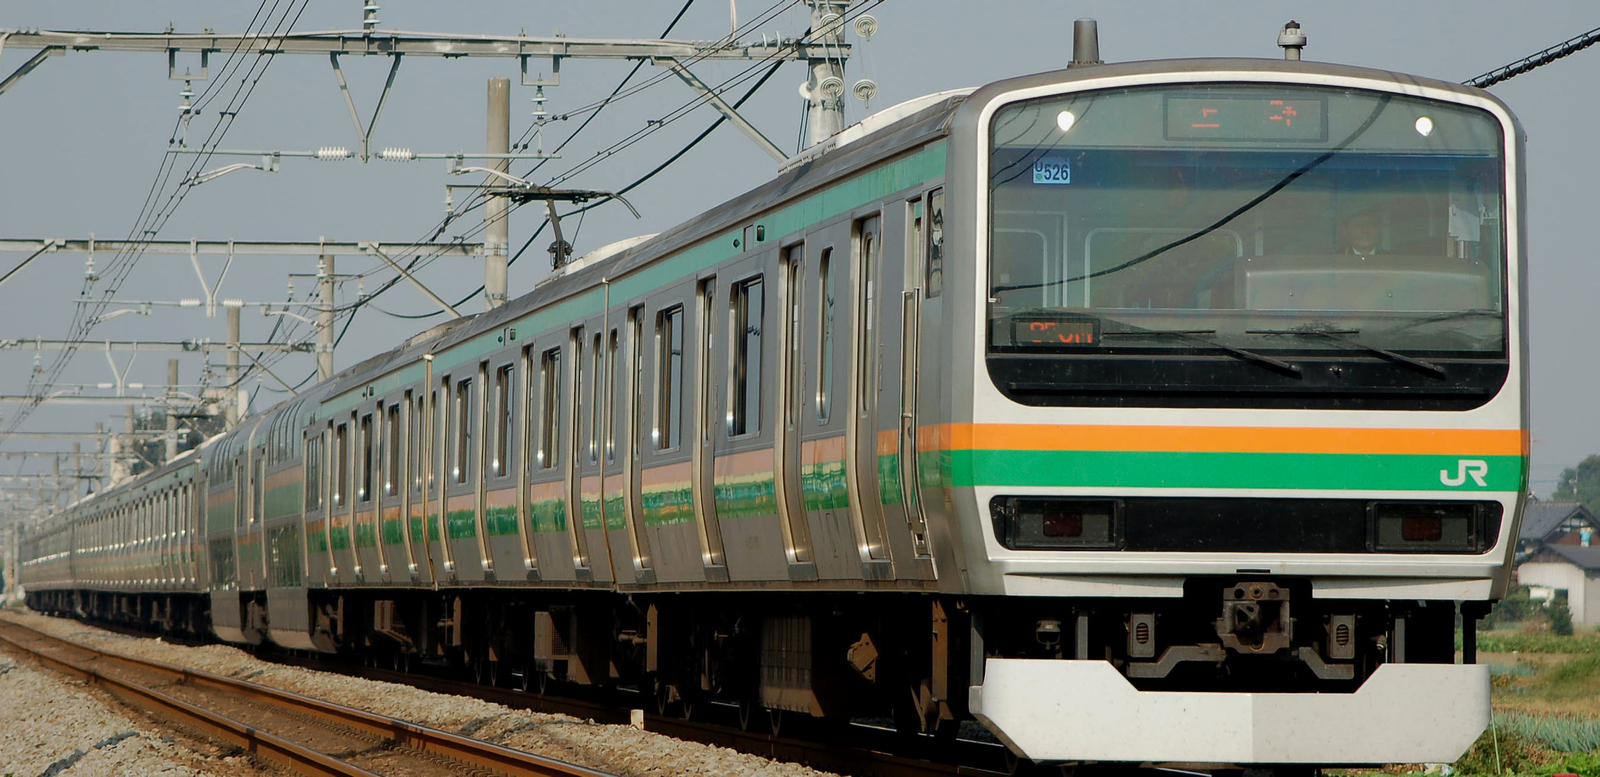 E231-1000 in October 2007 on the Takasaki route